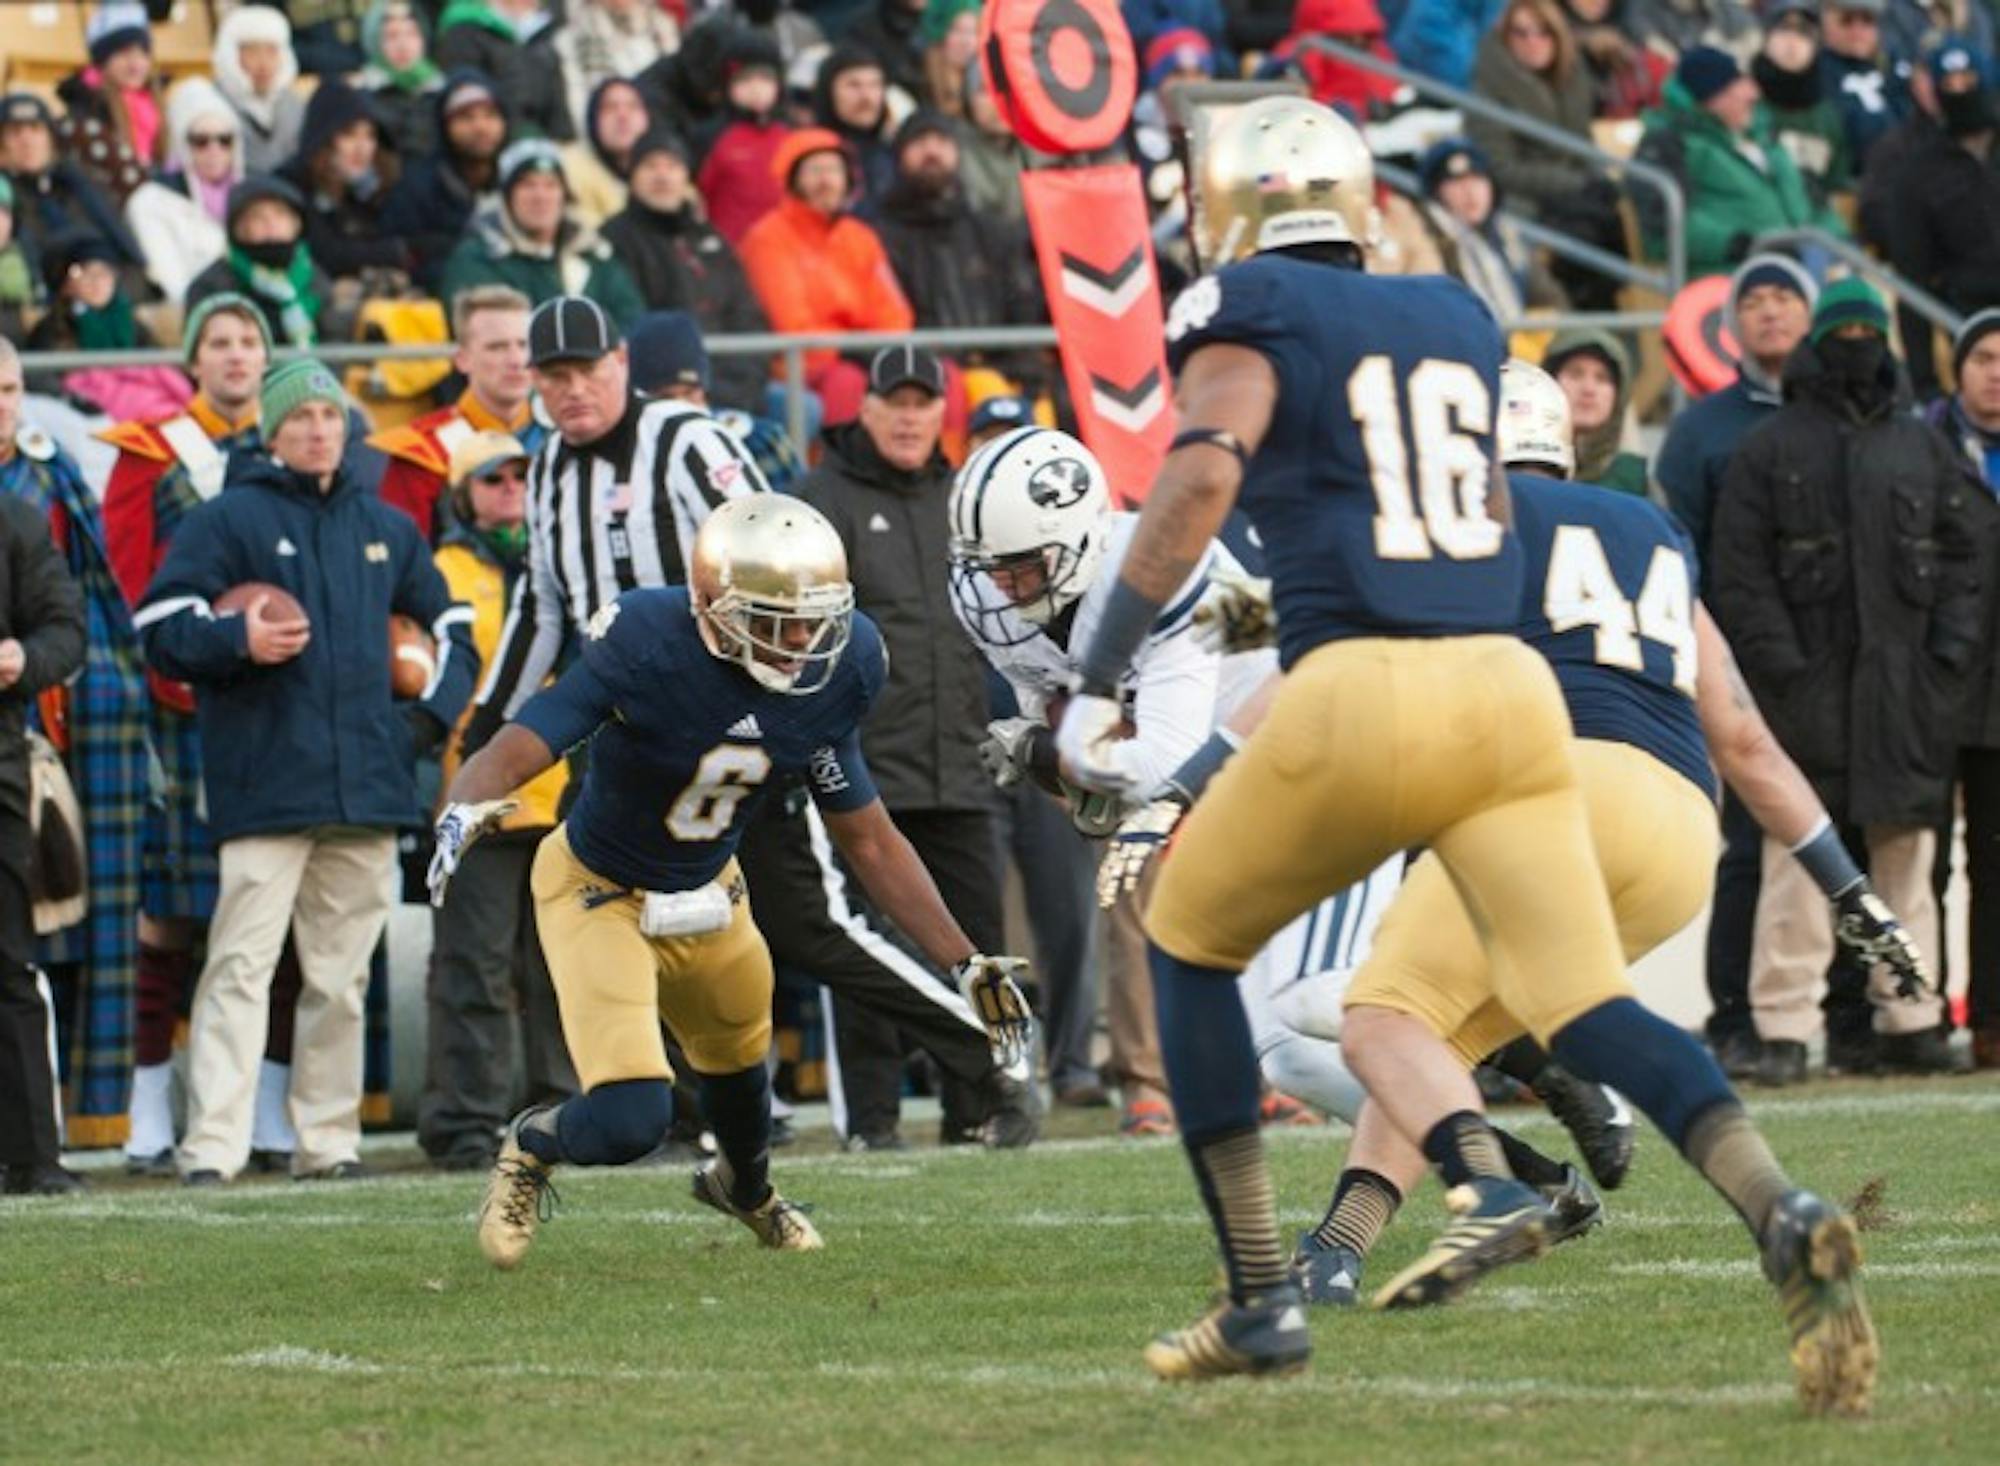 Senior cornerback KeiVarae Russell, left, prepares to make a tackle during Notre Dame’s 23-13 win over BYU at Notre Dame Stadium on Nov. 23, 2013. Russell returns after serving a one-year suspension in 2014.